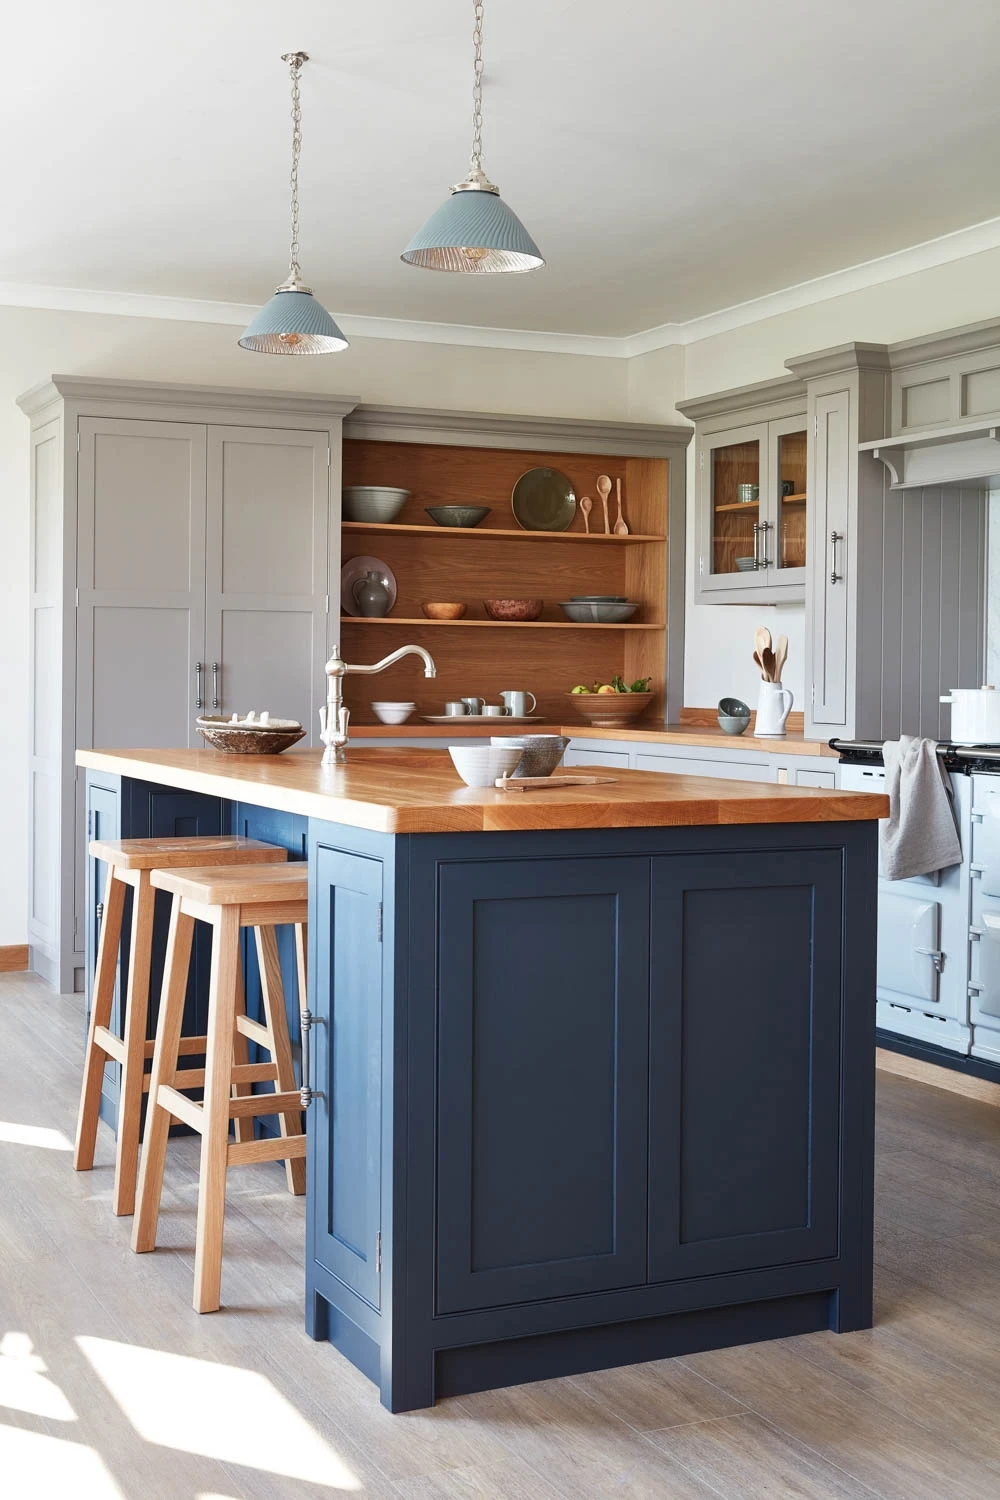 Traditional Shaker cabinets with corbels and beading blend seamlessly with a statement Aga, creating a timeless farmhouse kitchen.